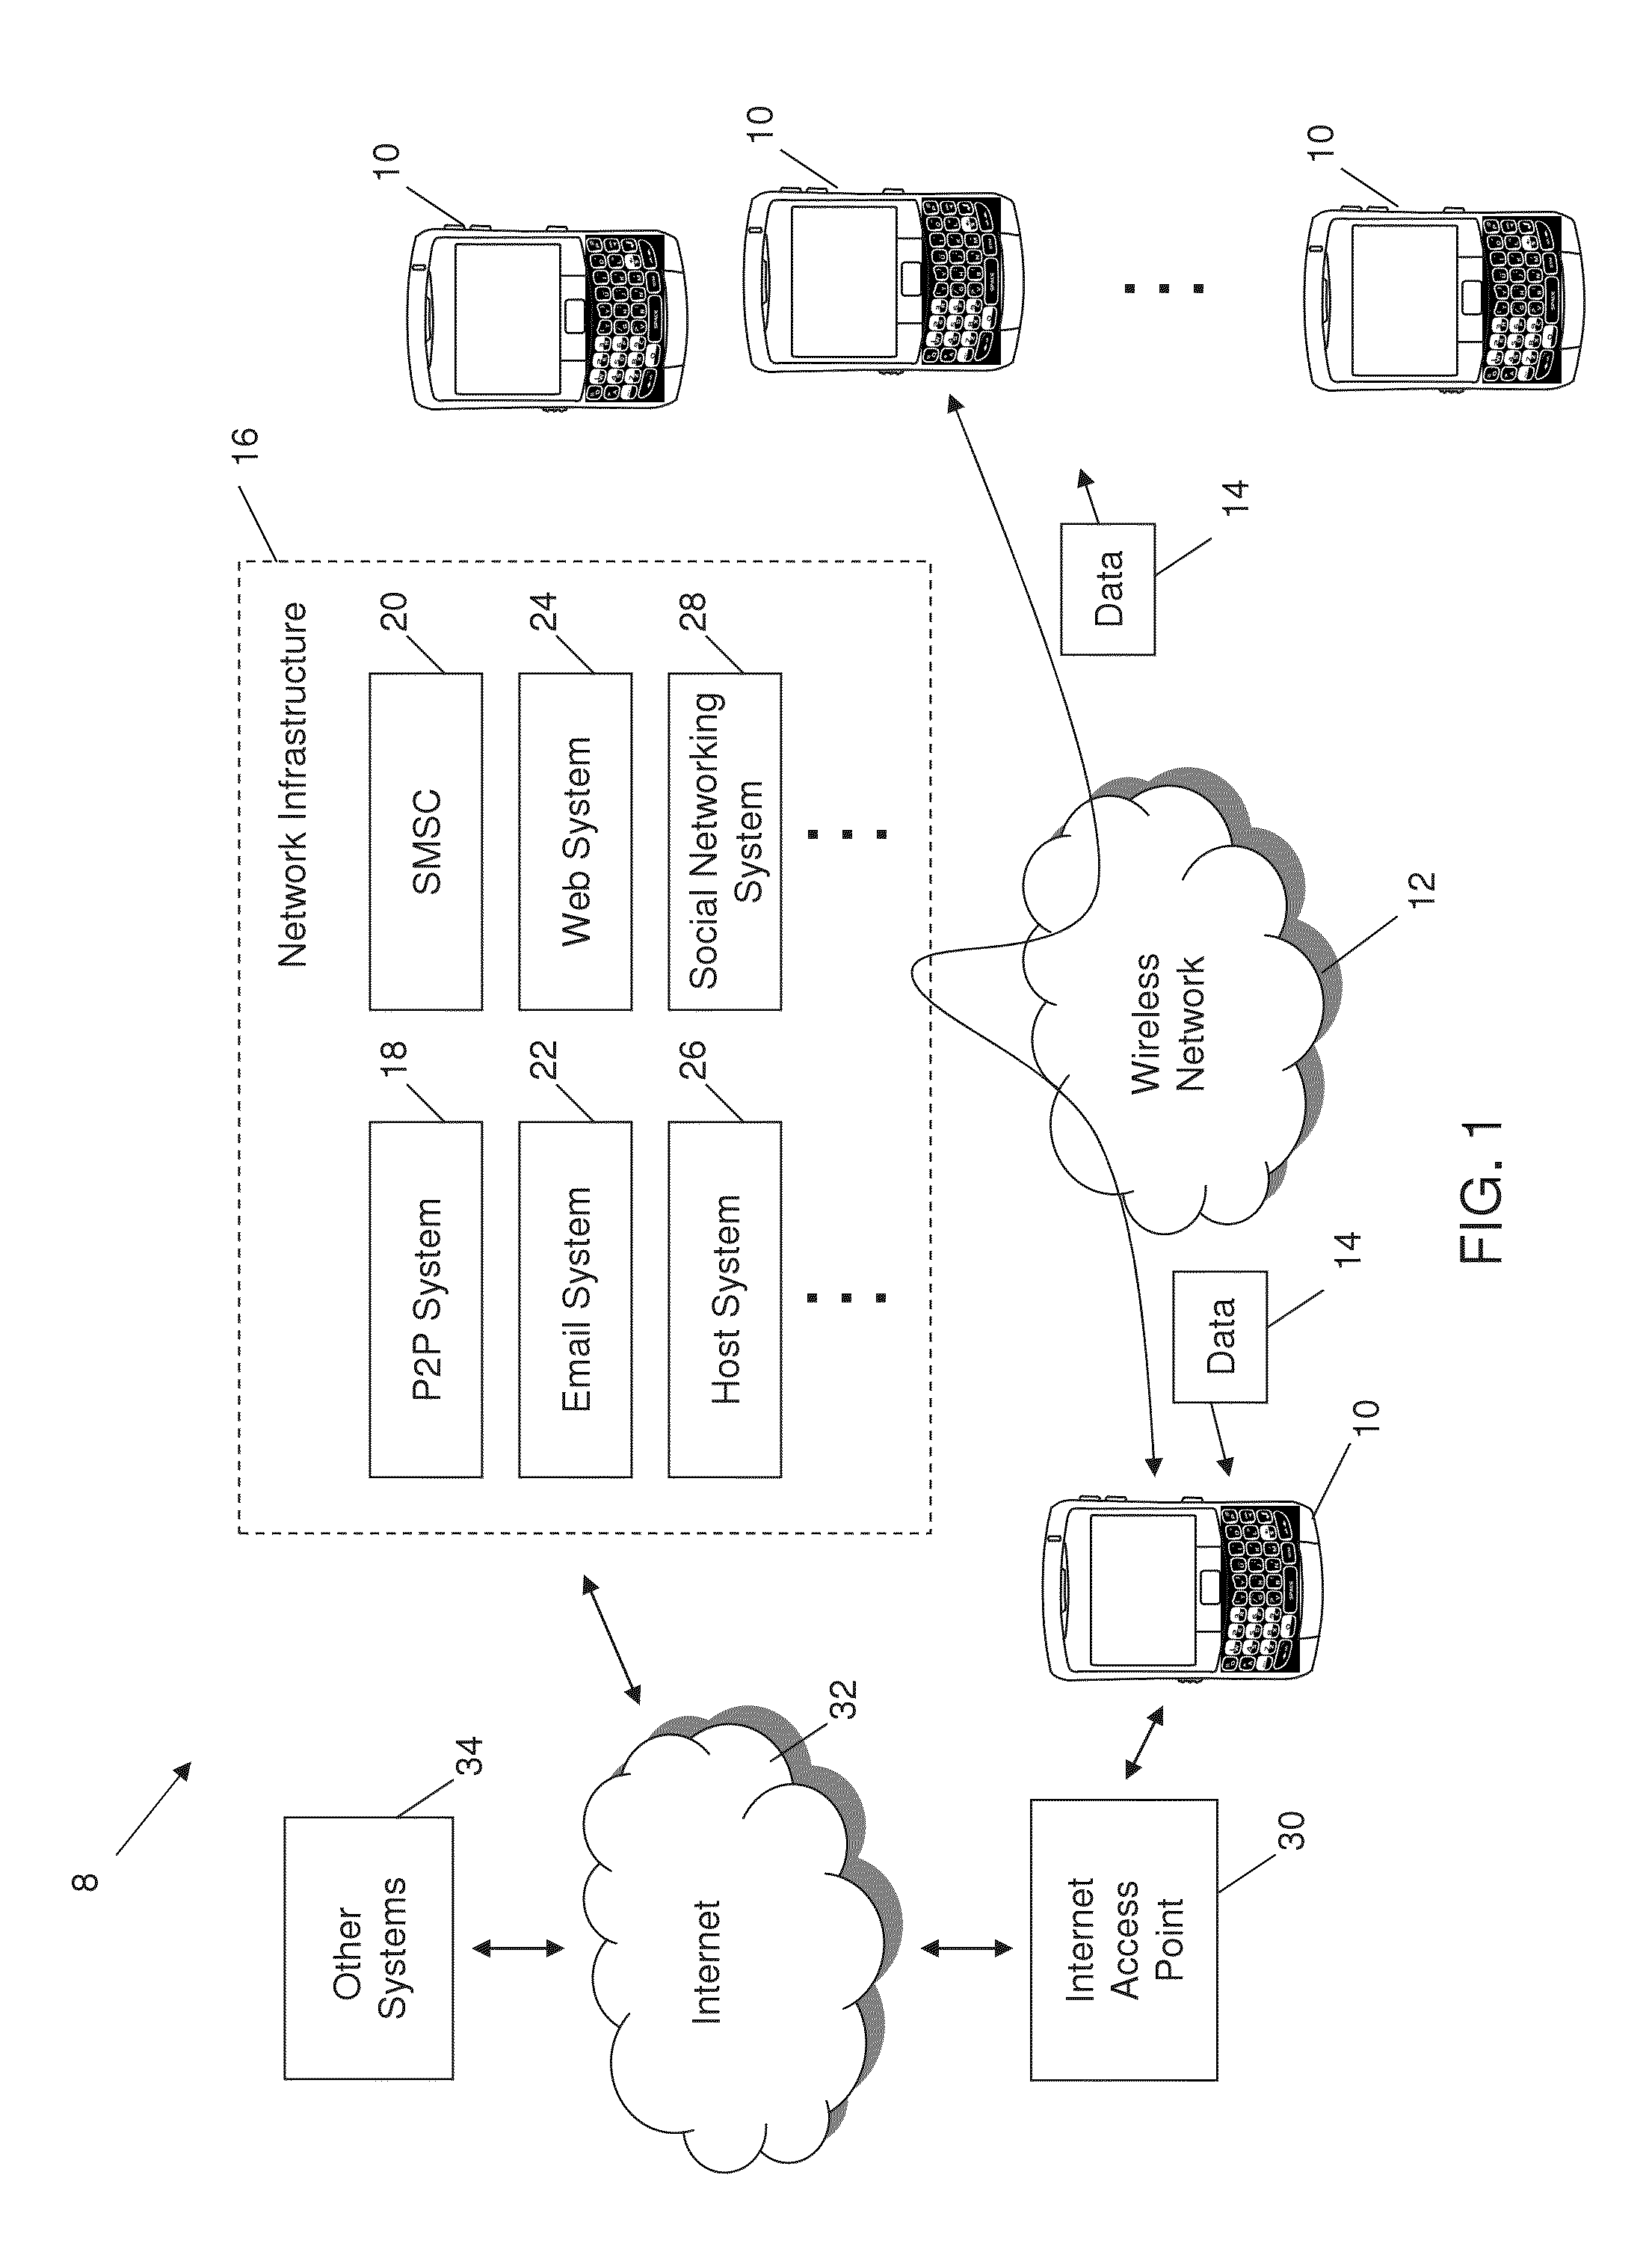 System and Method for Enabling Voice and Video Communications Using a Messaging Application